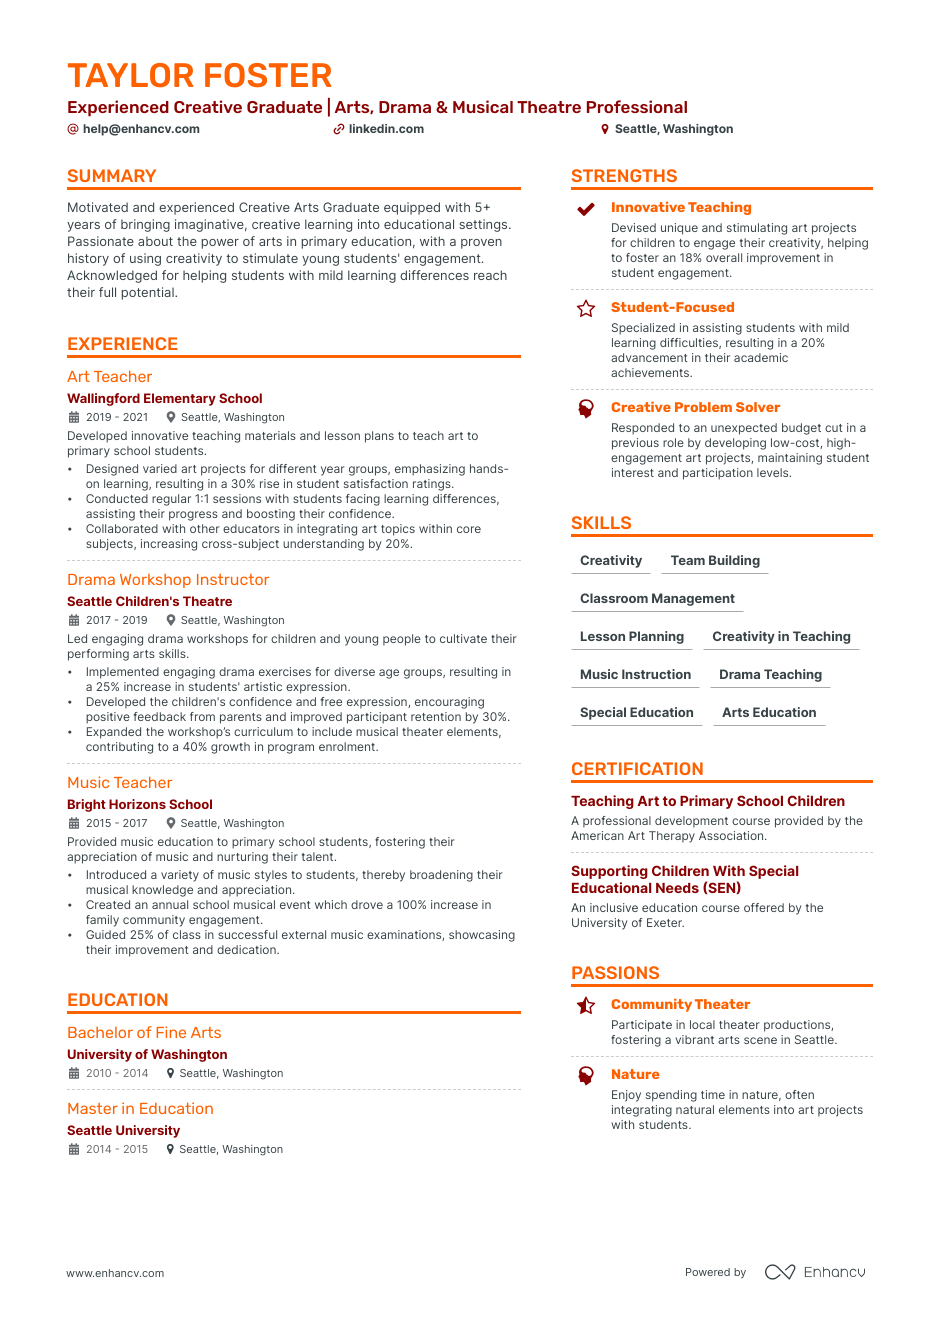 how to build a theatre resume